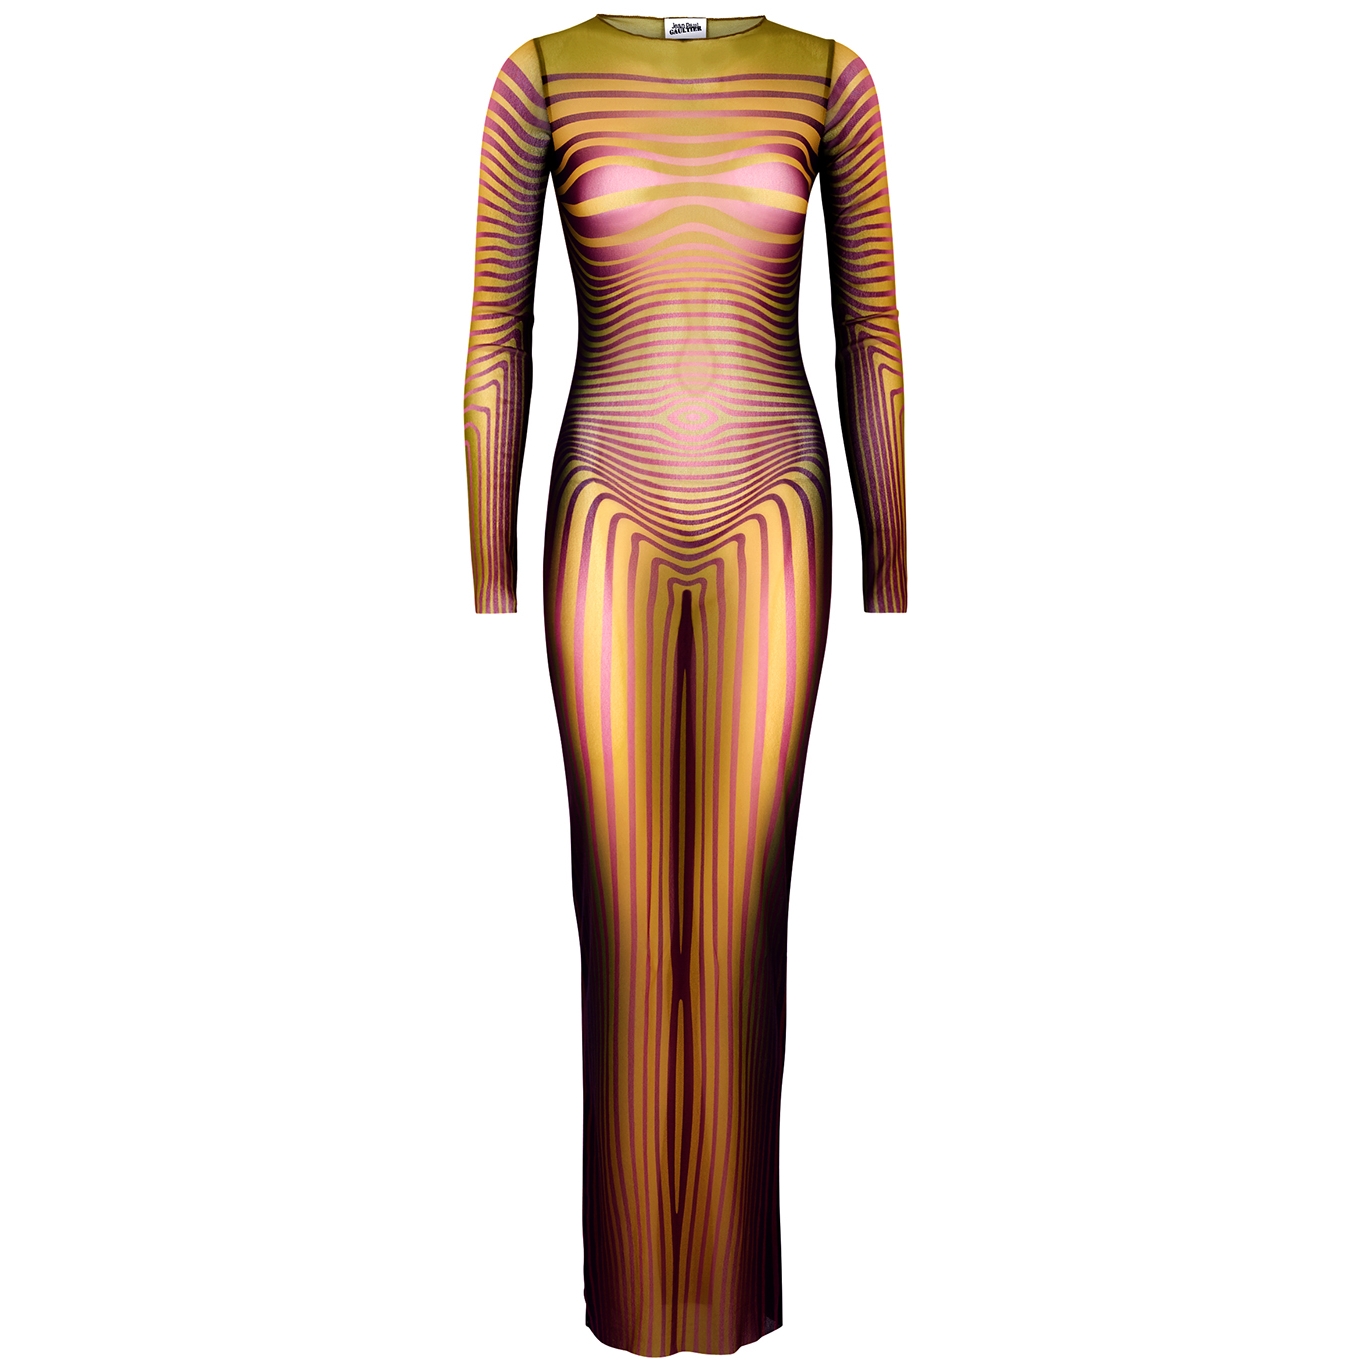 JEAN PAUL GAULTIER BODY MOPHING PRINTED TULLE MAXI DRESS